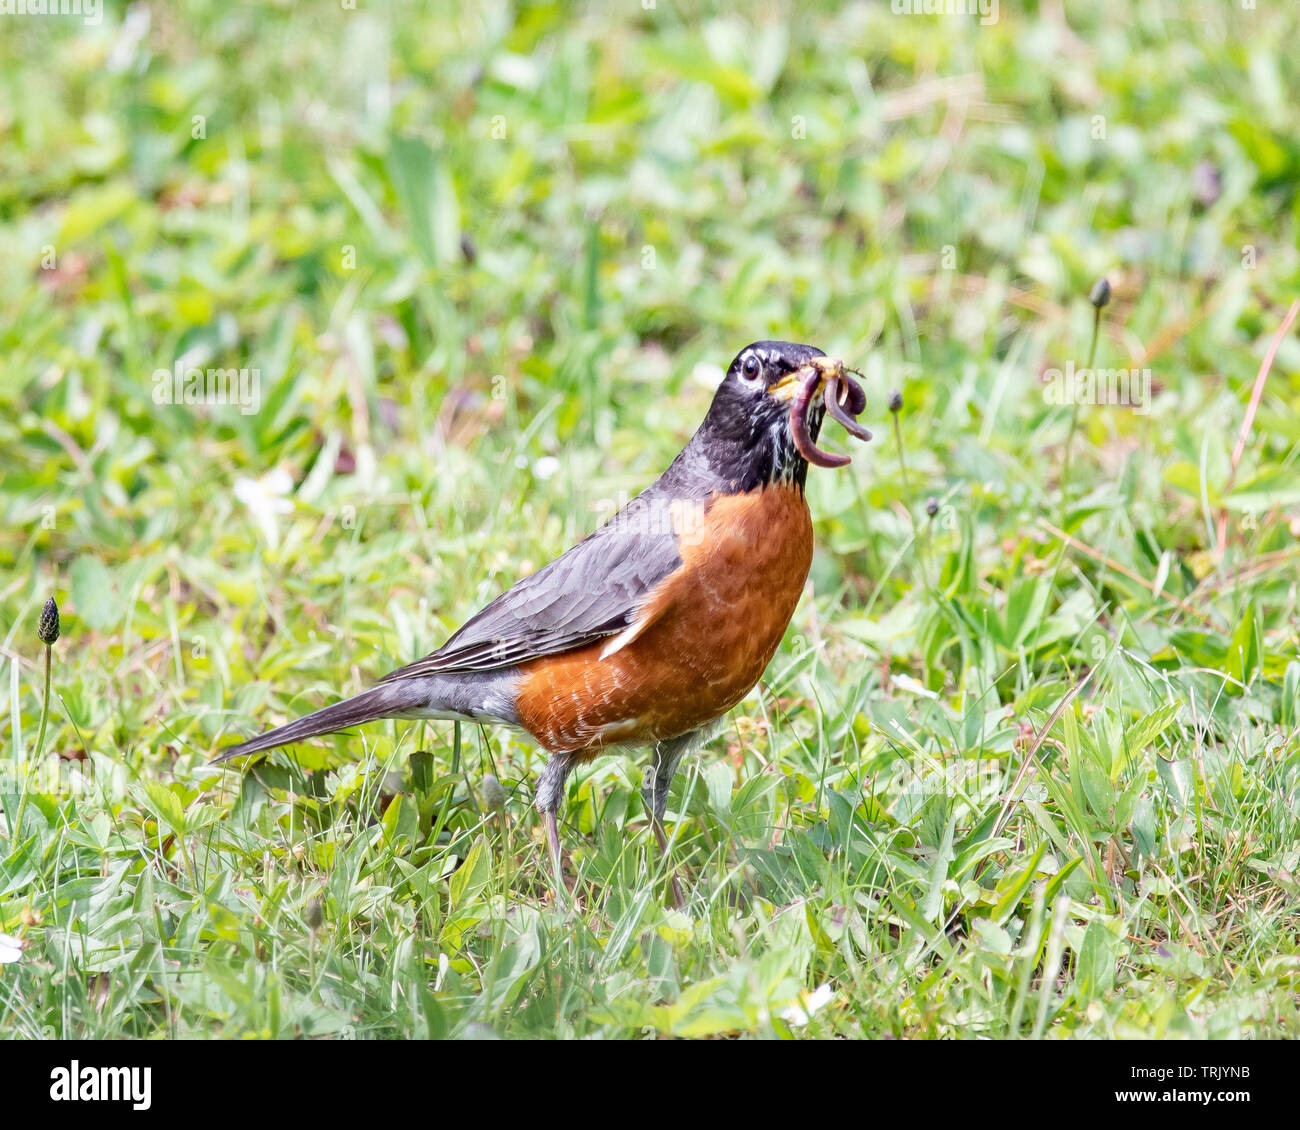 An American robin, Turdus migratorius, standing on the grass with a worm dangling from it's beak Stock Photo